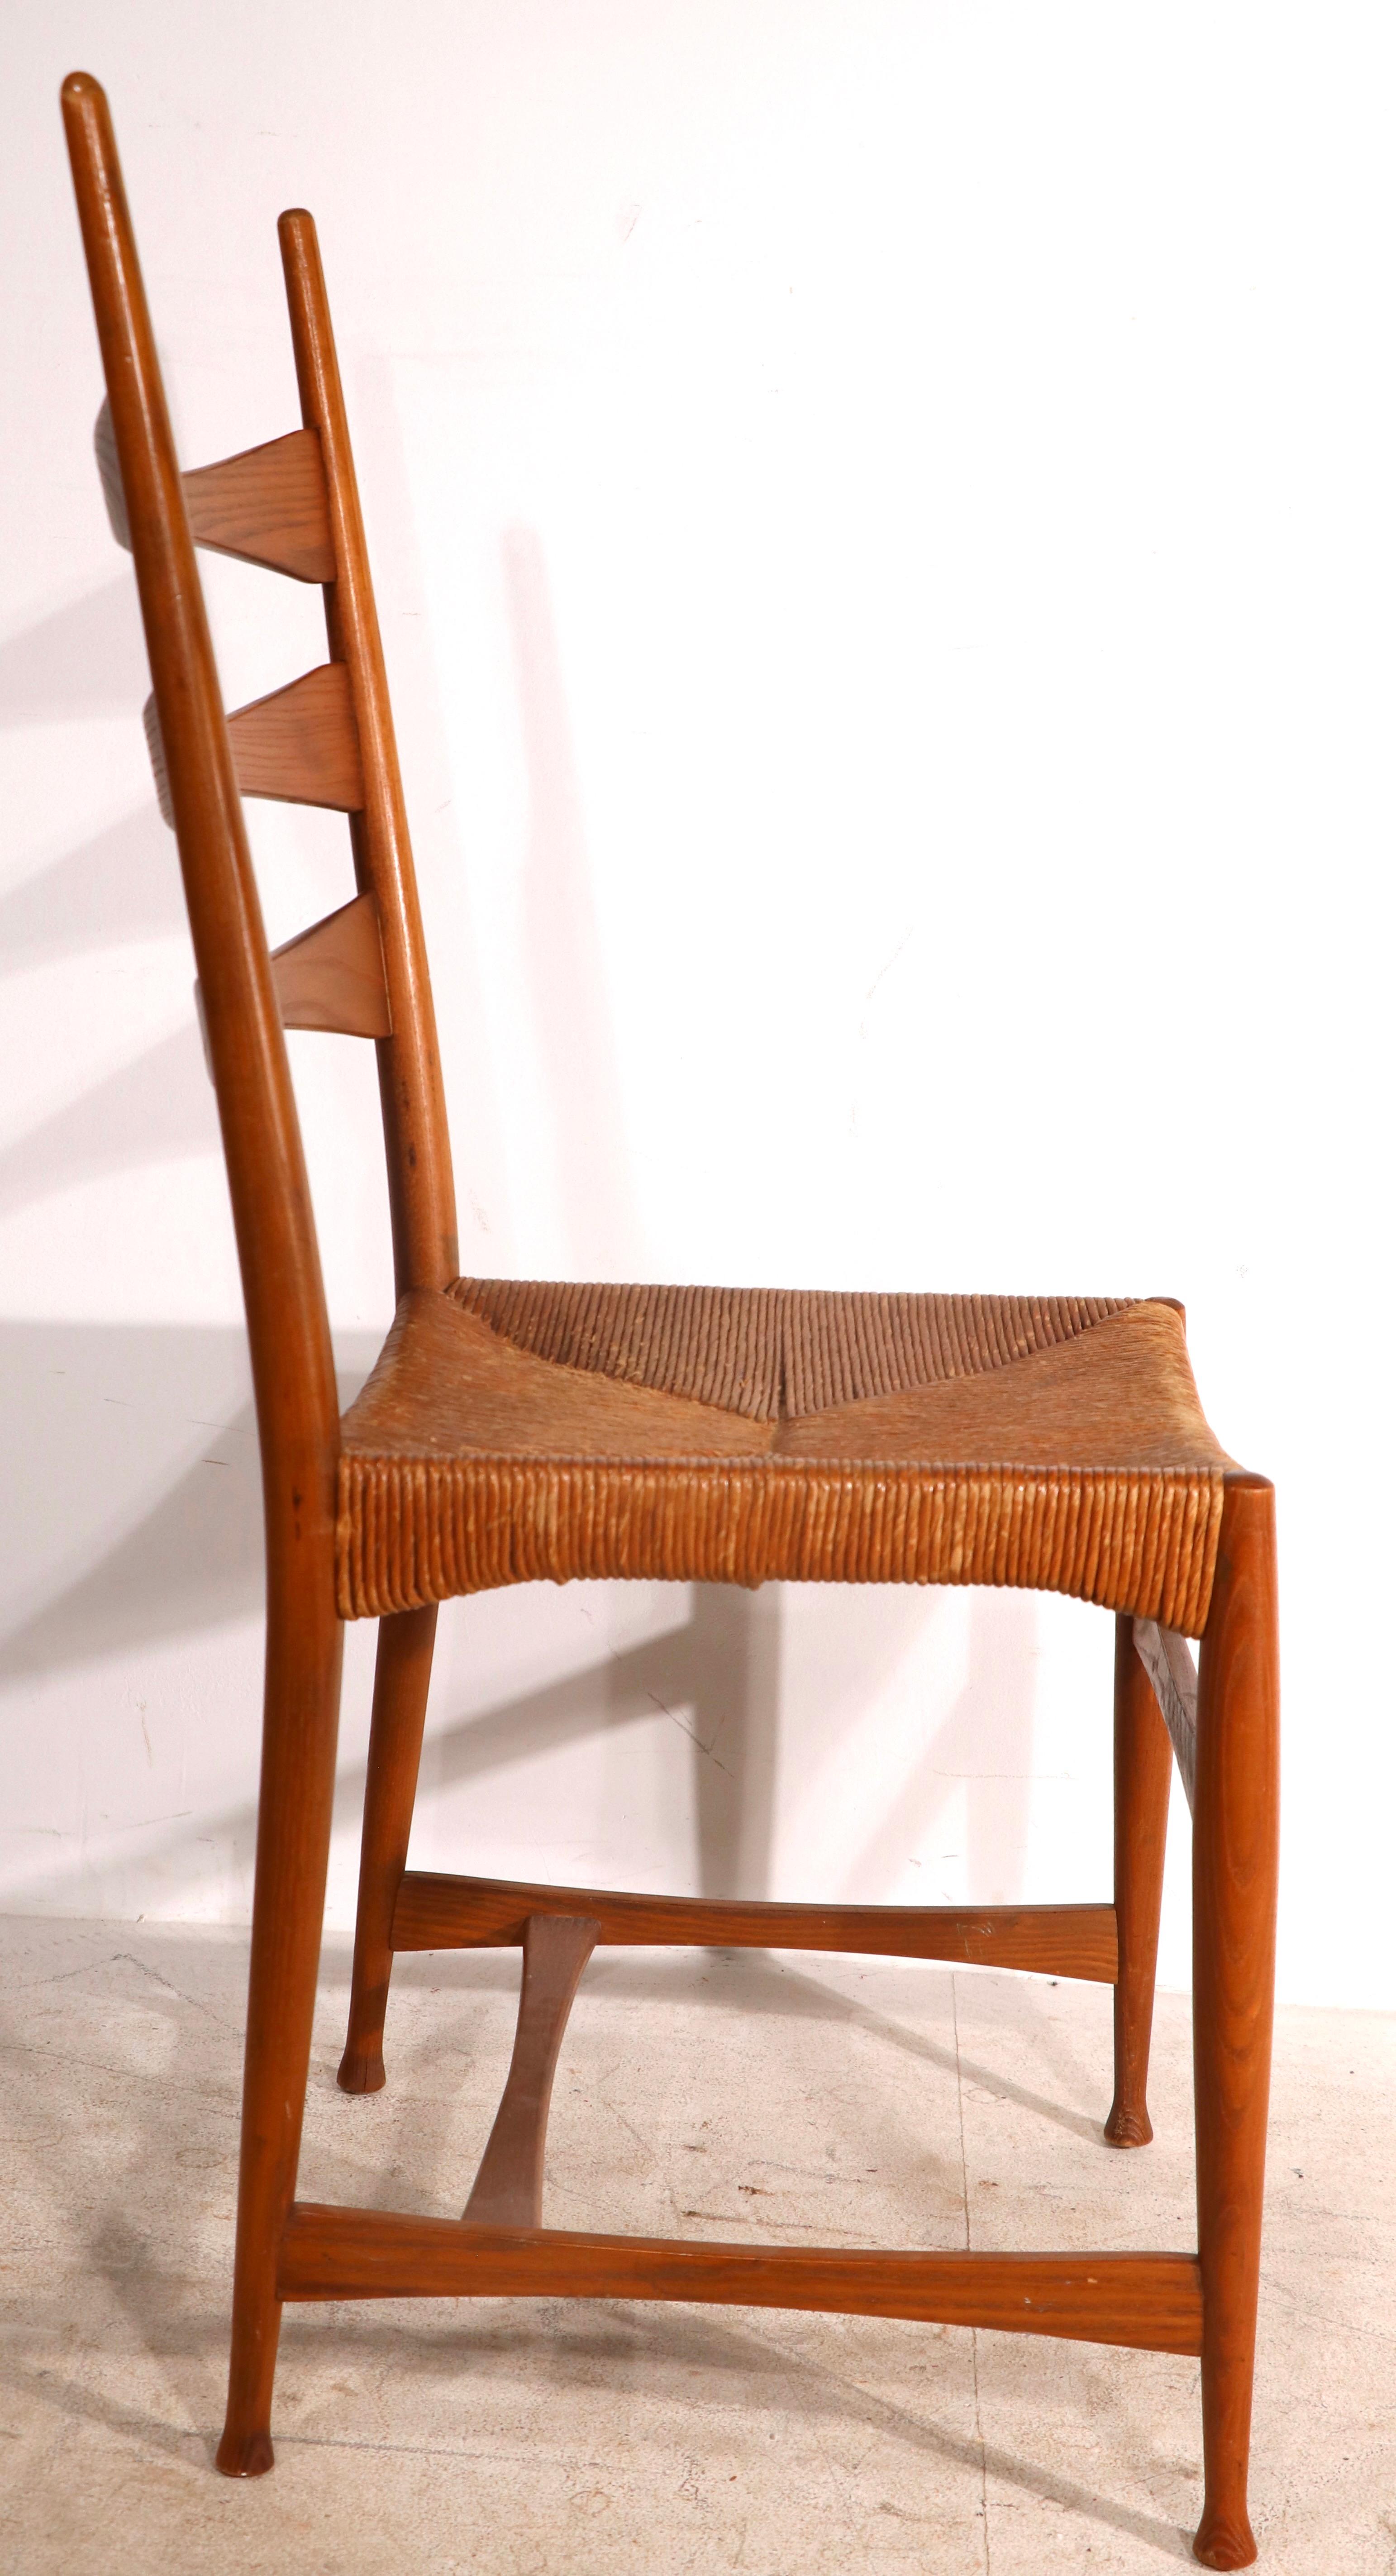 Voguish, chic mid century style really only the Italians could attain, this gem was produced by master designer Paolo Buffa, and it is in very fine, original, untouched condition.
Probably originally part of a set of dining chairs, but this chair